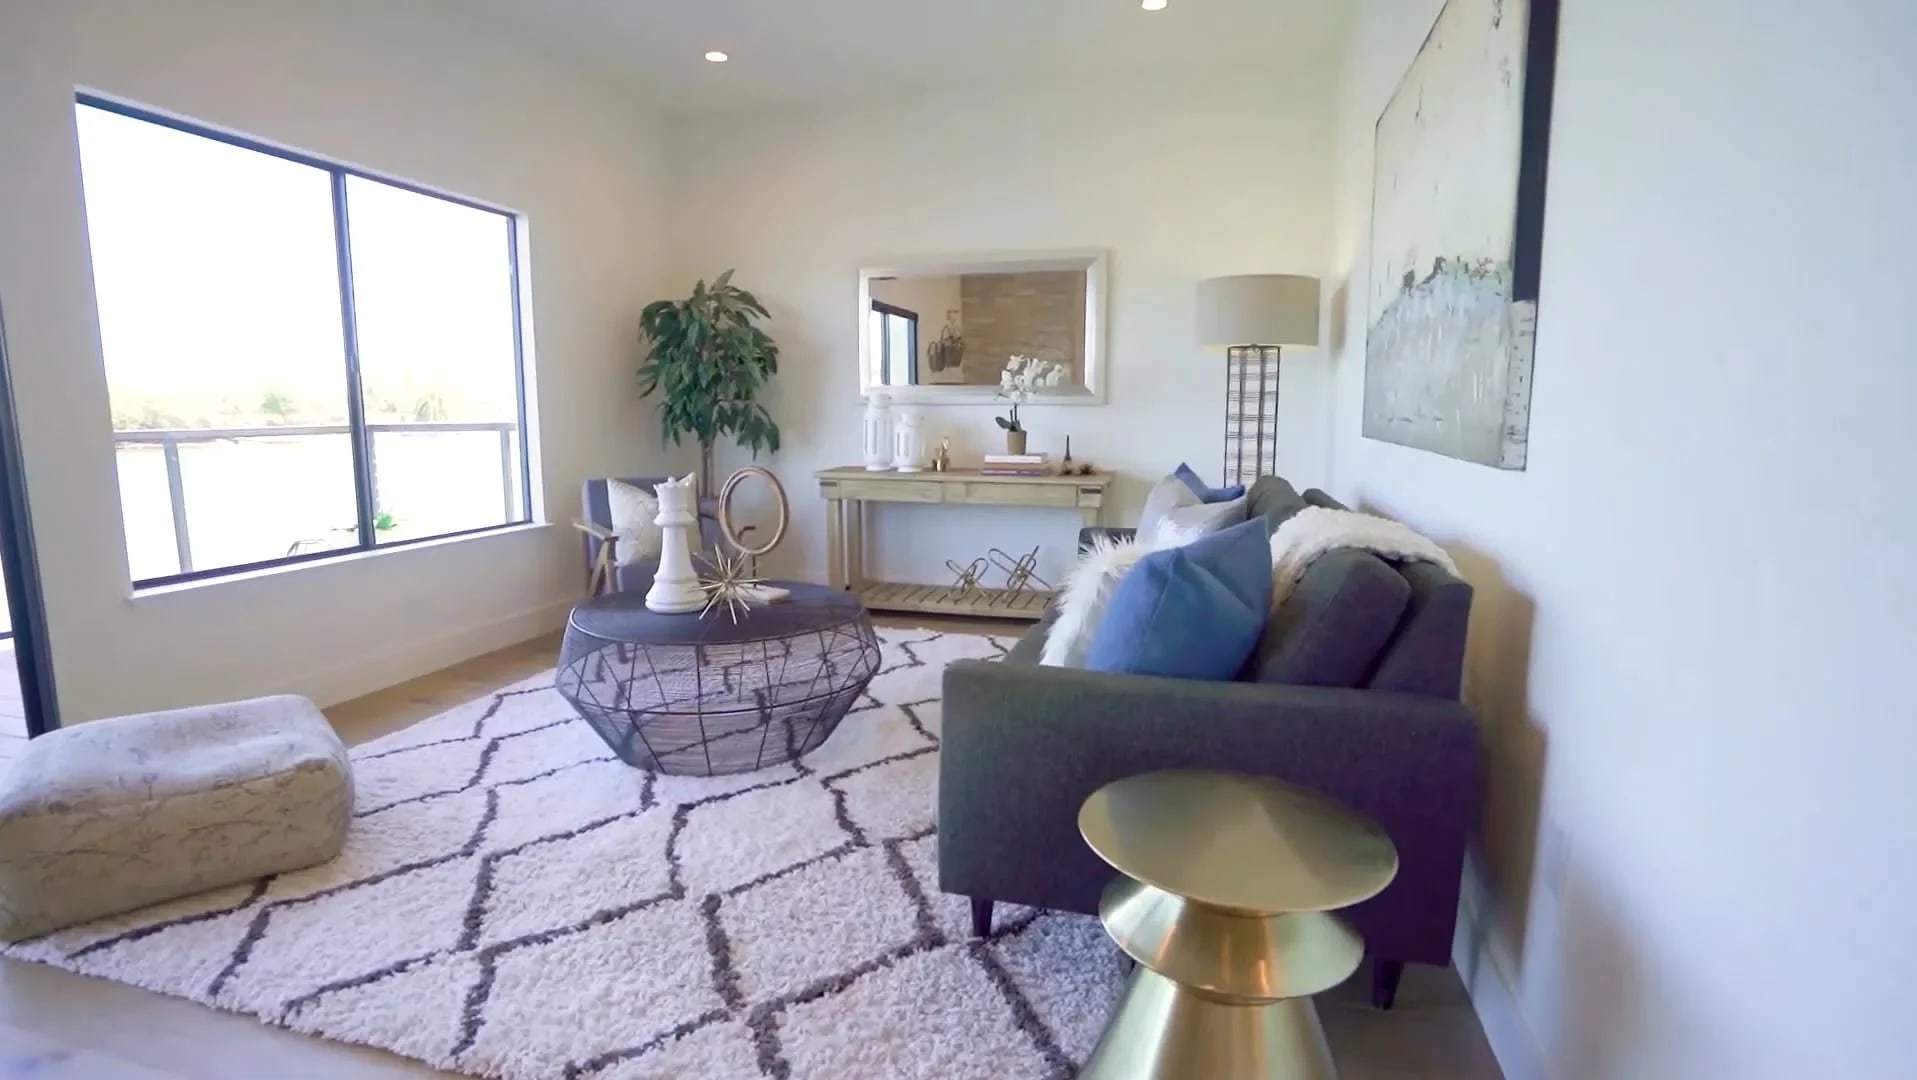 1551 Shoal Dr, San Mateo, CA Before + After Video tour video preview